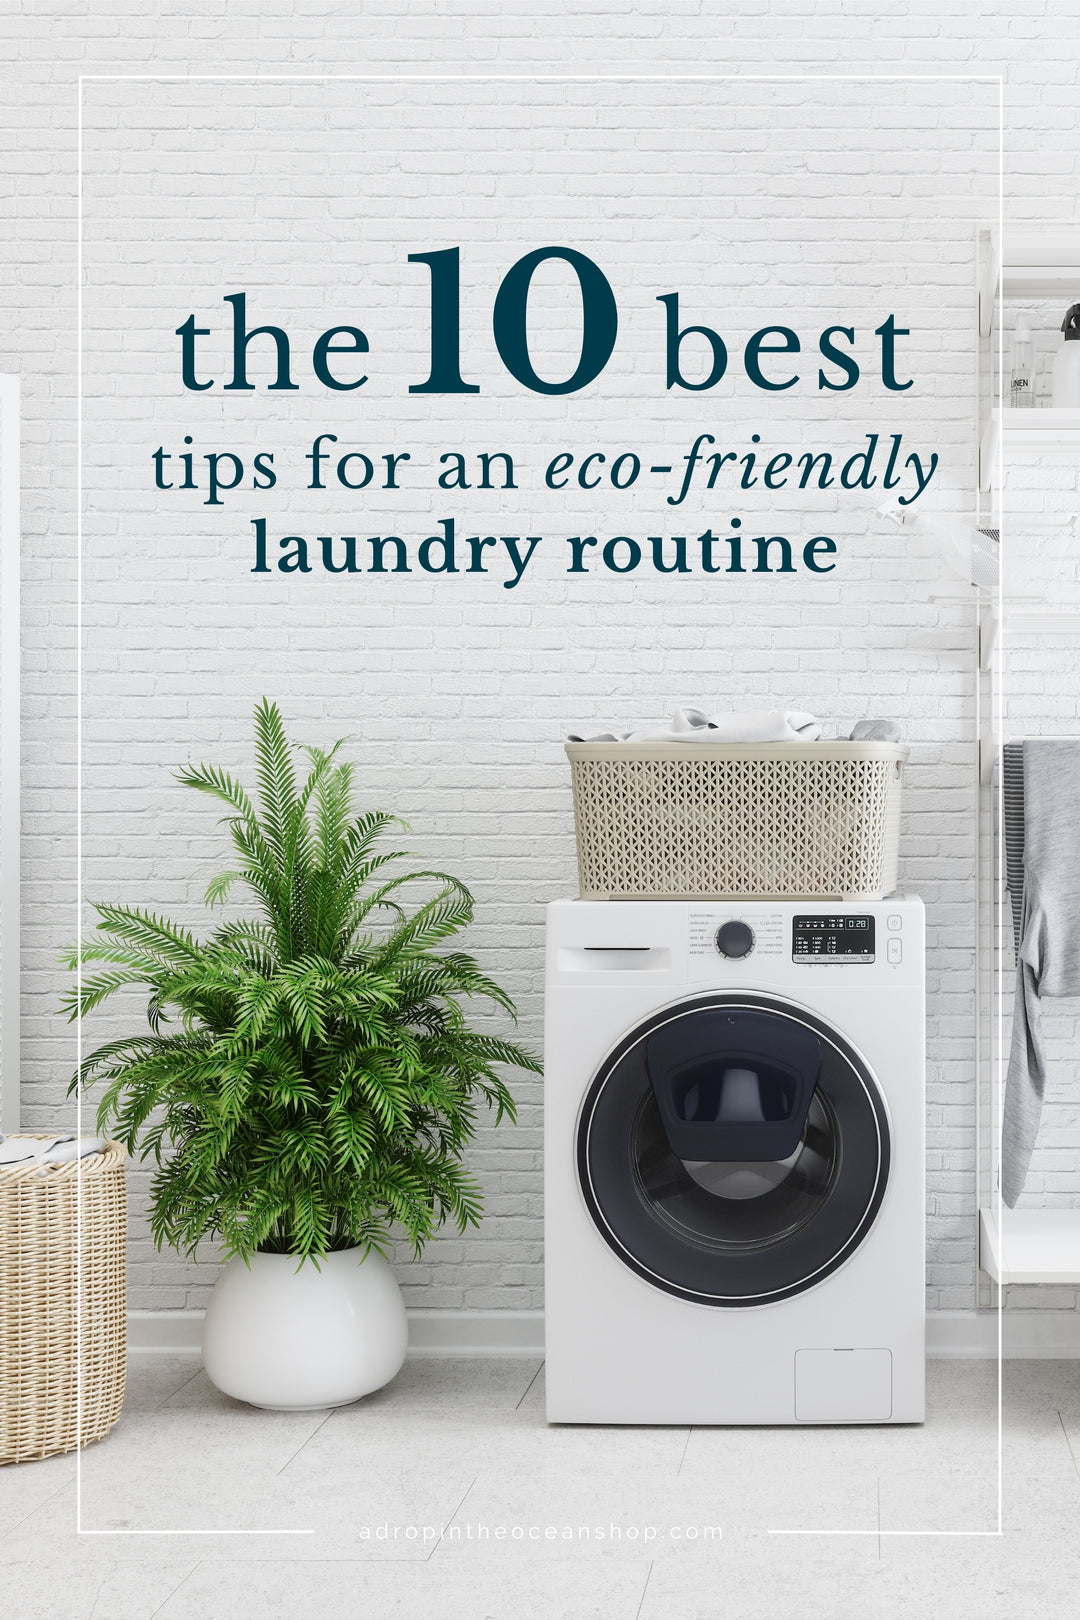 The 10 Best Tips for an Eco-Friendly Laundry Routine - A Drop in the Ocean Zero Waste Blog